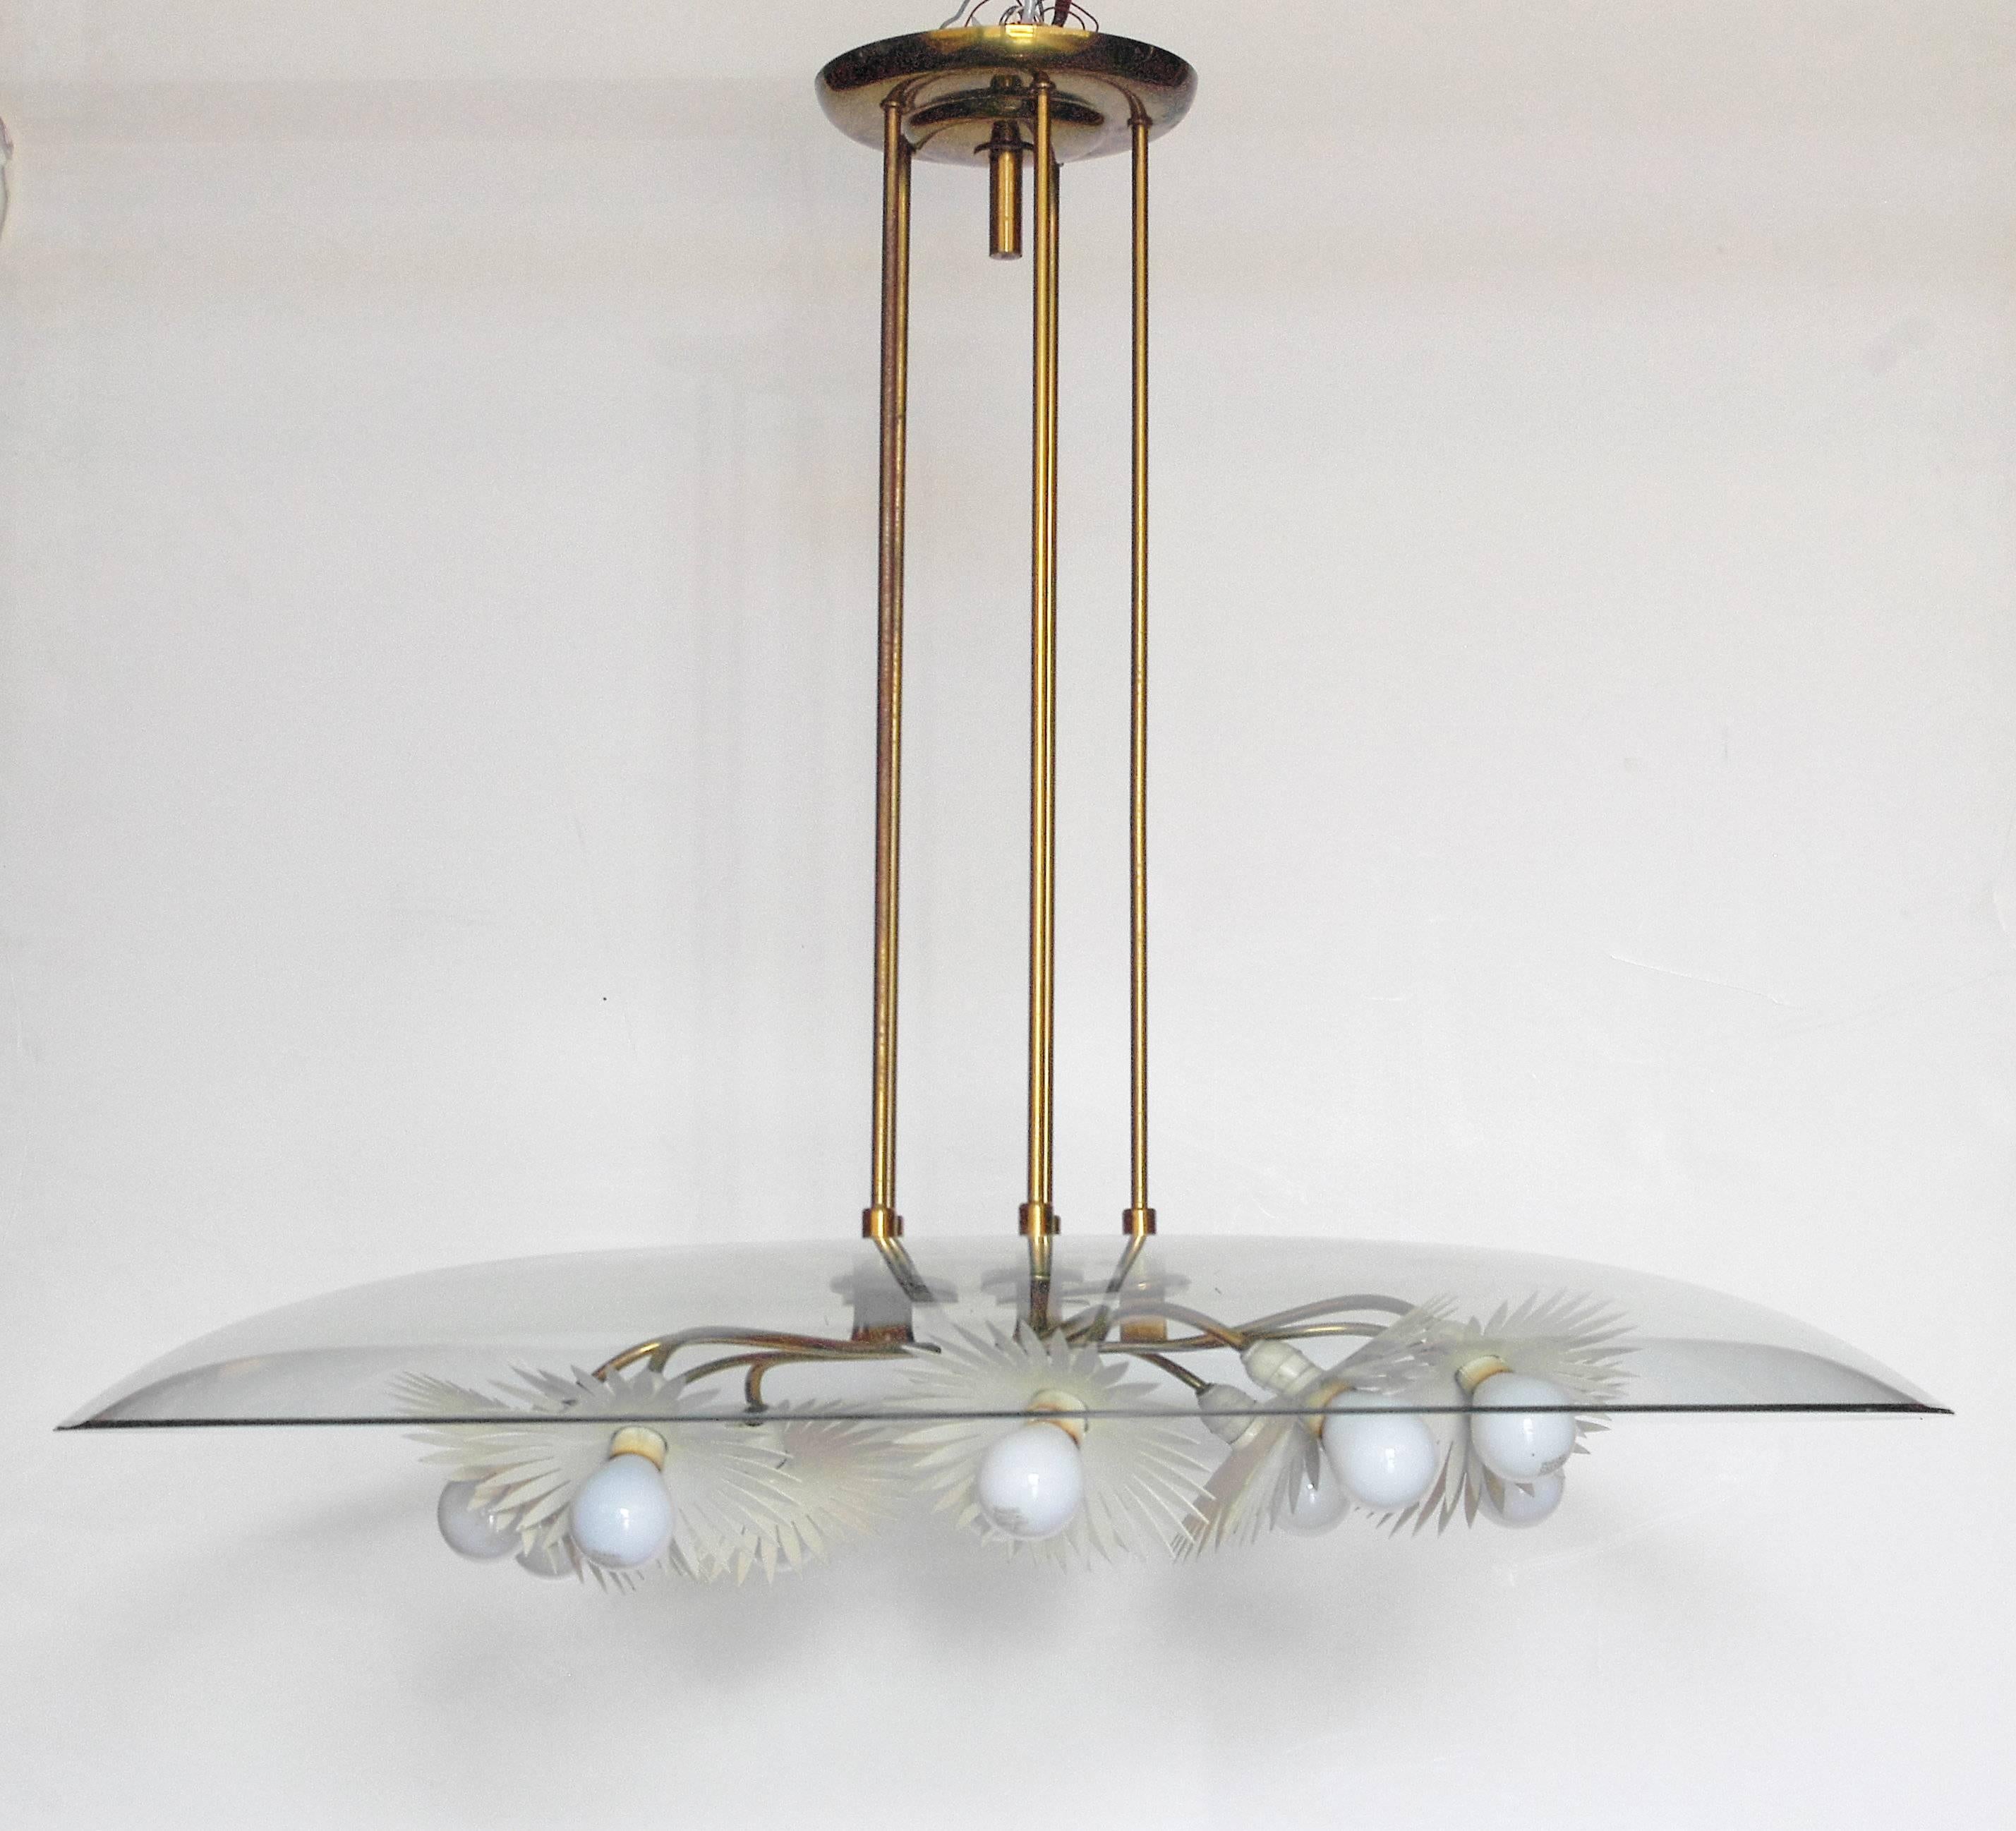 Important Italian chandelier with beveled glass, brass, and painted aluminum. Designed by Pietro Chiesa, manufactured by Fontana Arte, circa 1948 / Made in Italy
Currently all parts are in original condition including the light sockets which are not